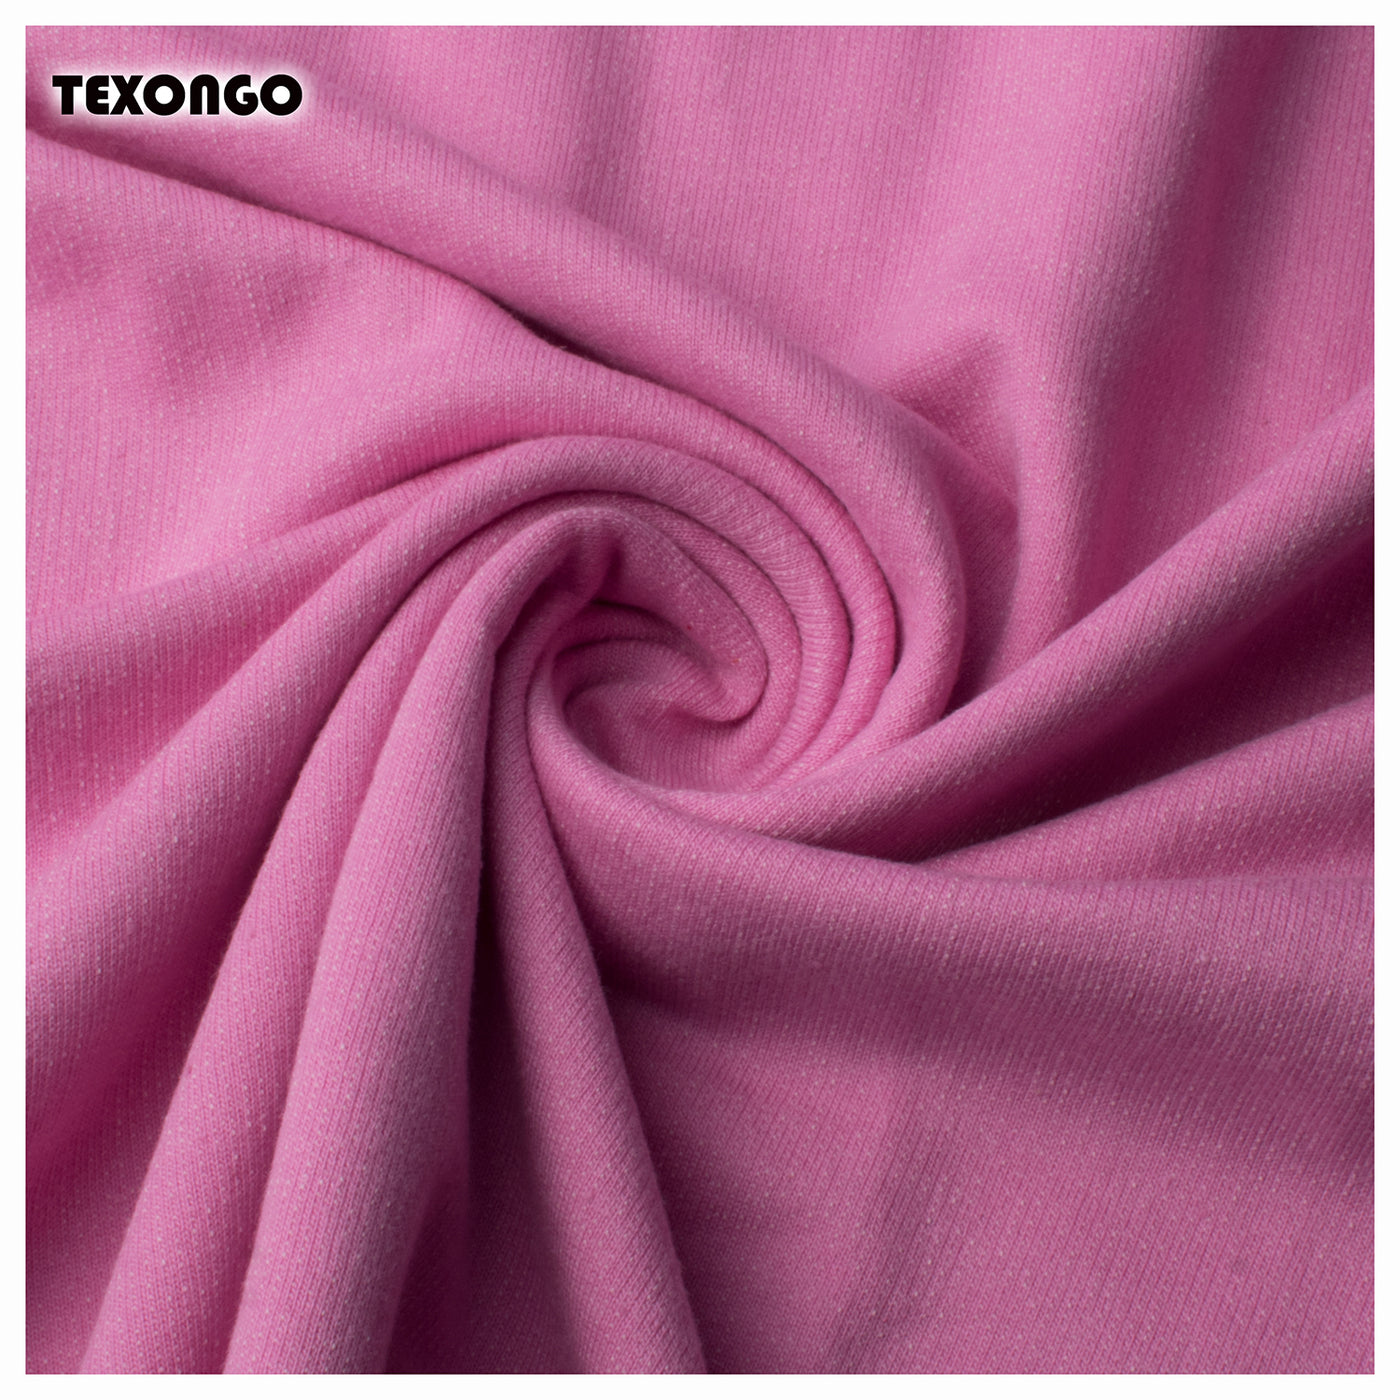 Cotton Terry fabric 